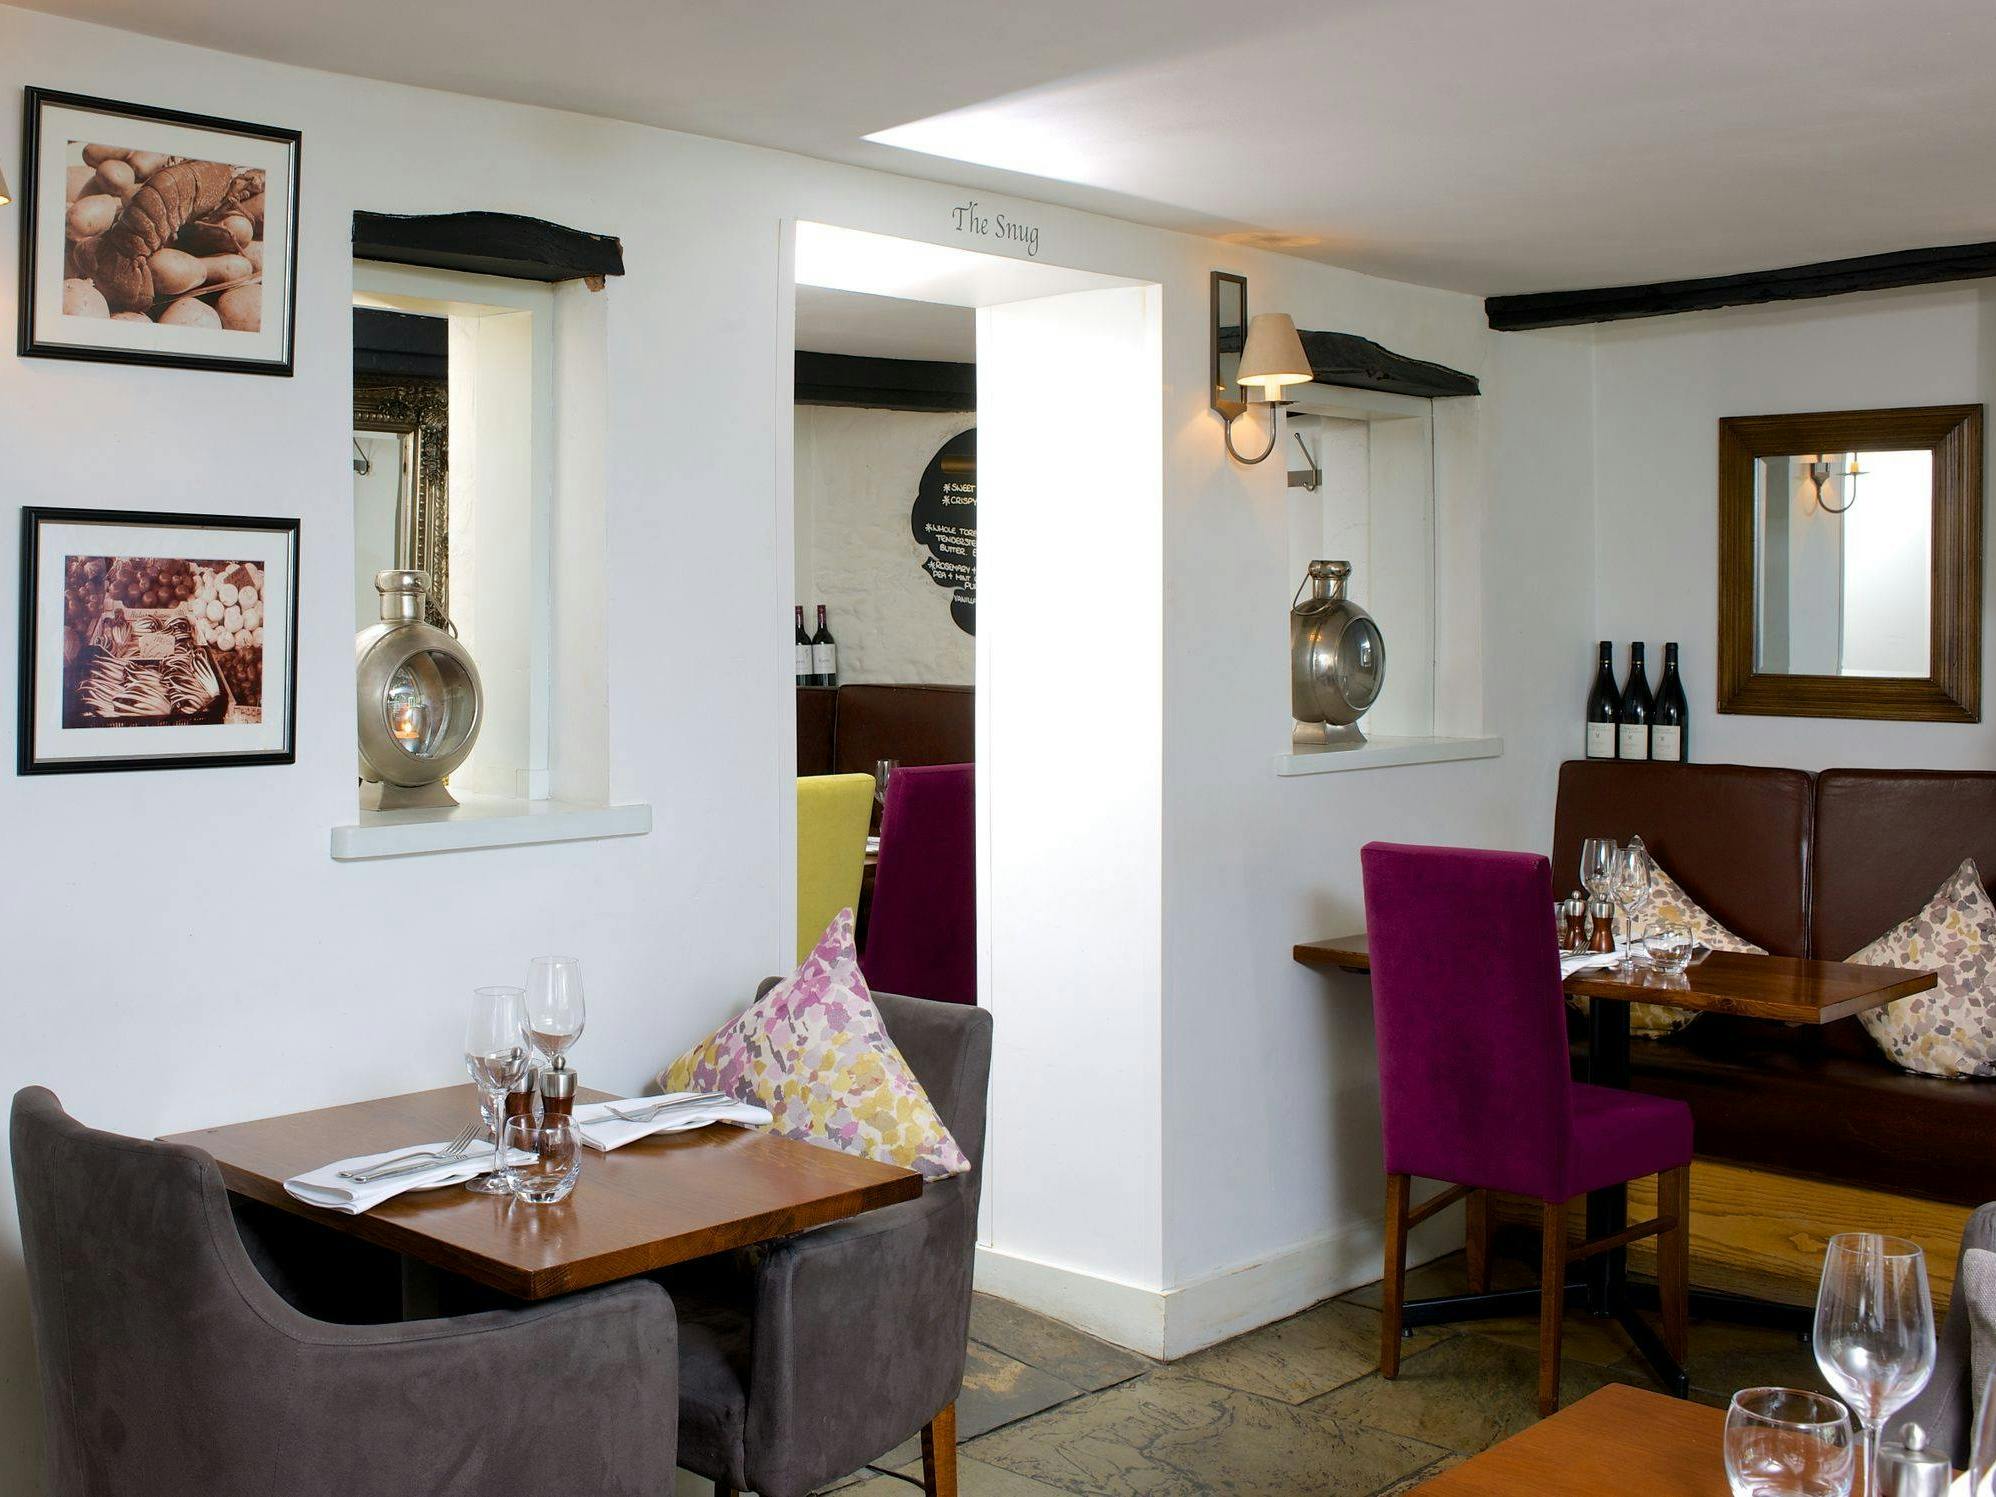 The sumptuous dining room at the crab and lobster with velvet chairs and images of seafood on the walls. 